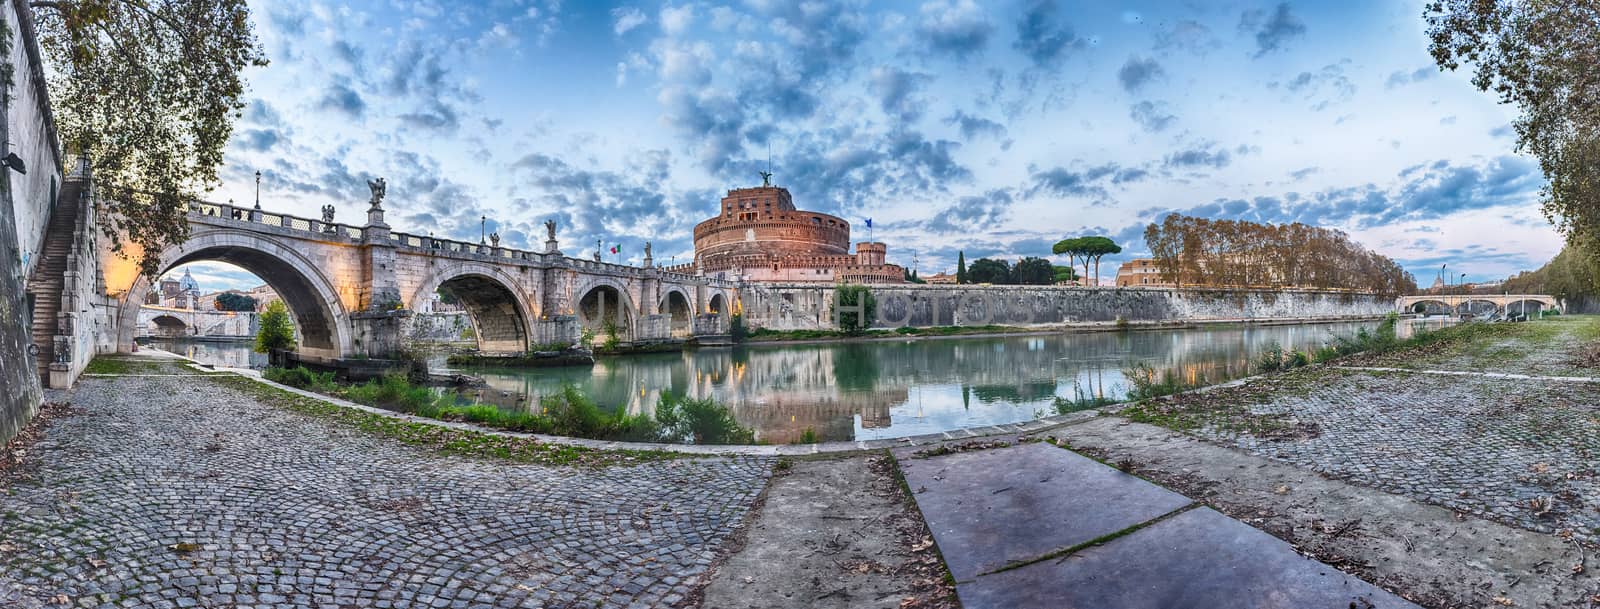 Panoramic view of Castel Sant'Angelo fortress and bridge, Rome,  by marcorubino